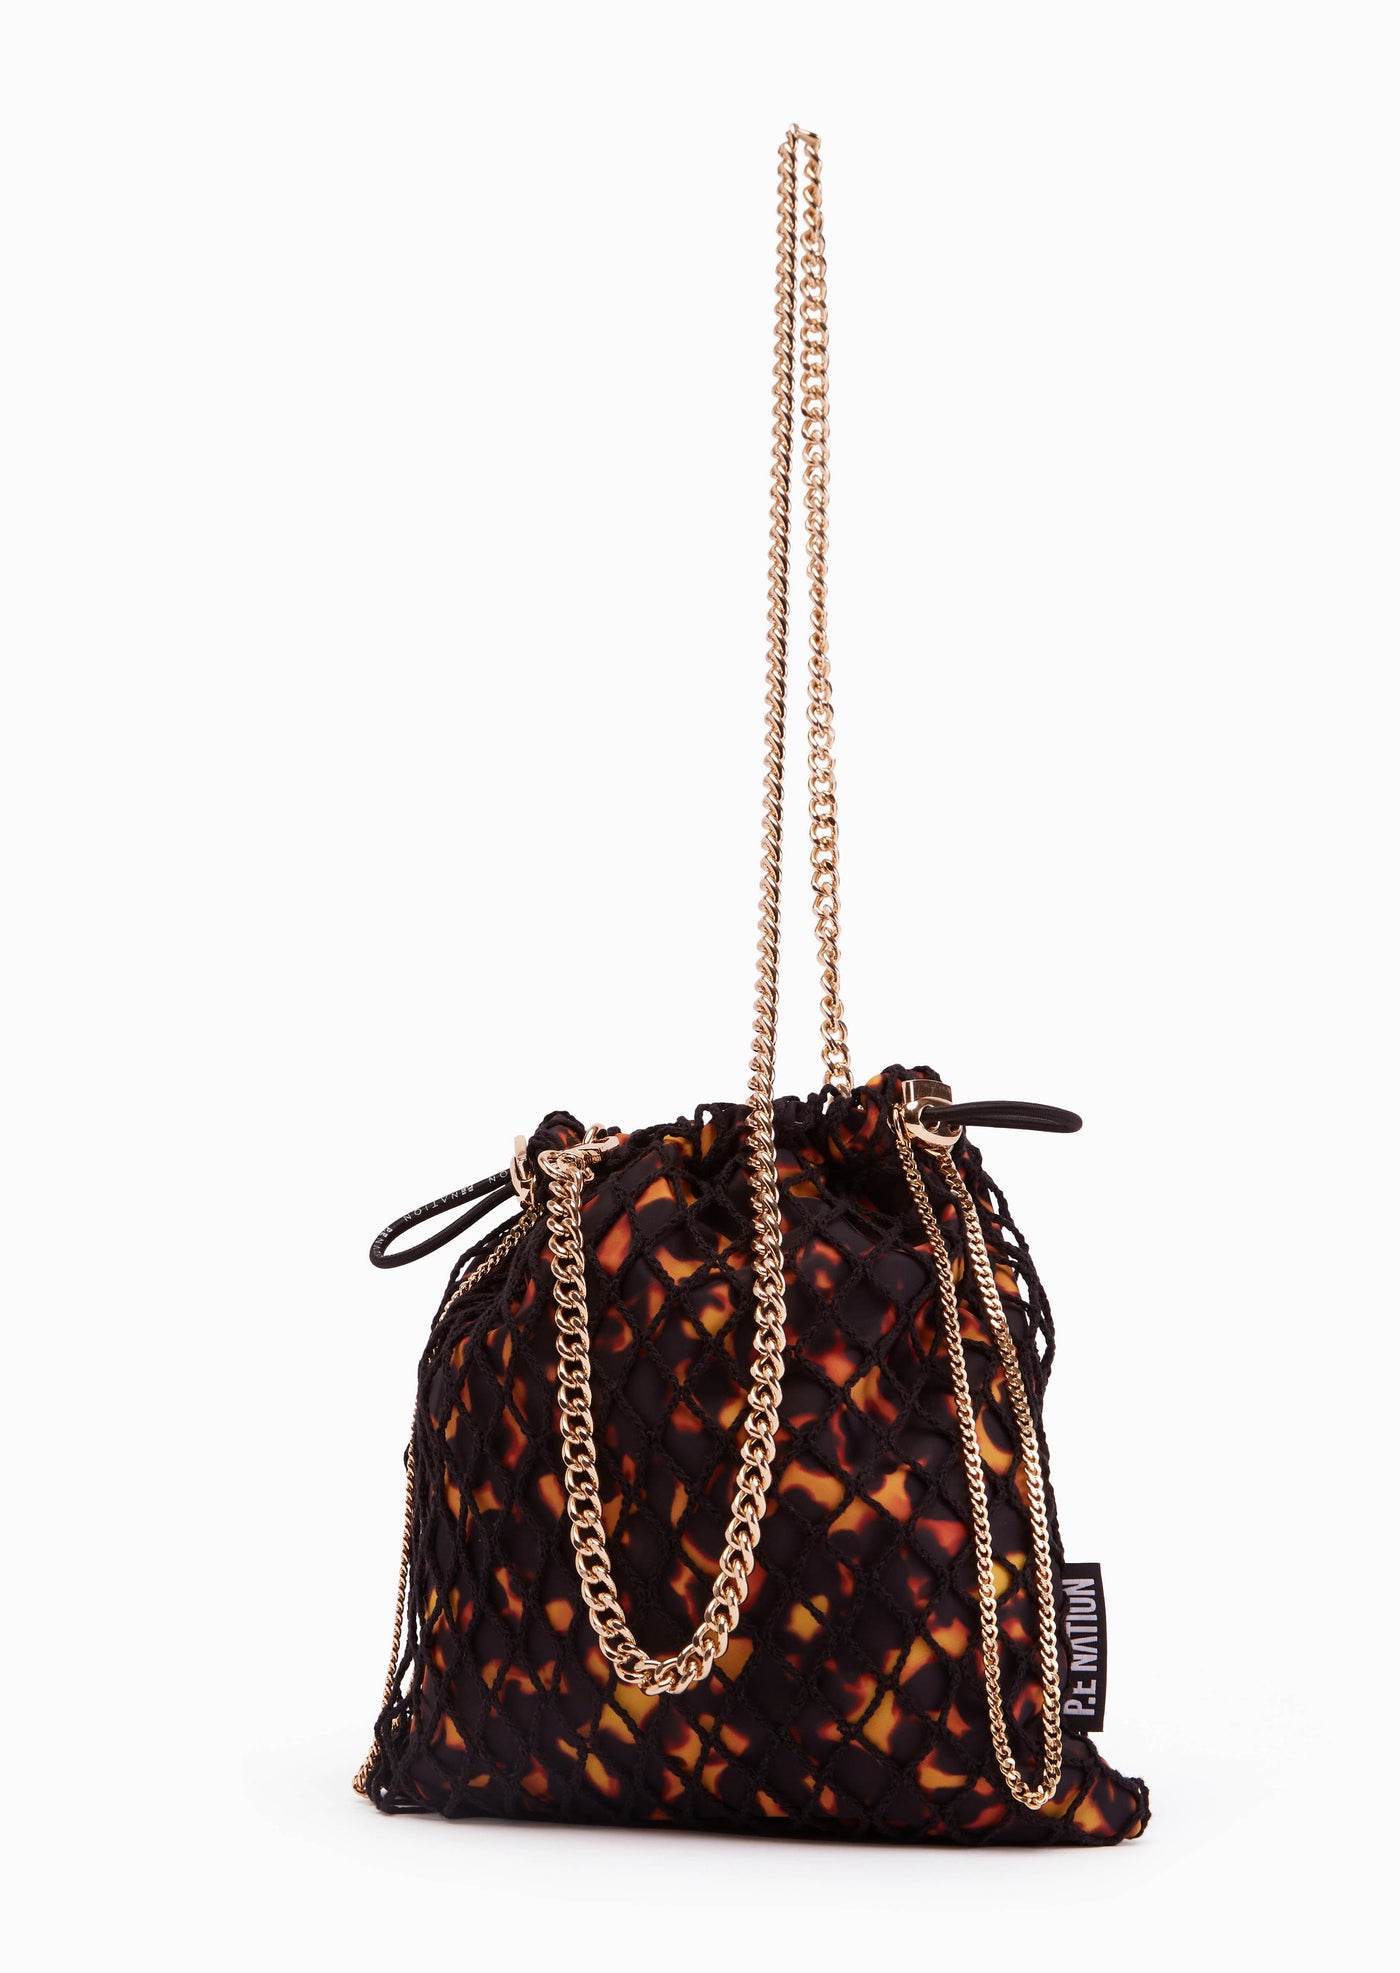 DIGNITY BAG IN TORTOISE SHELL